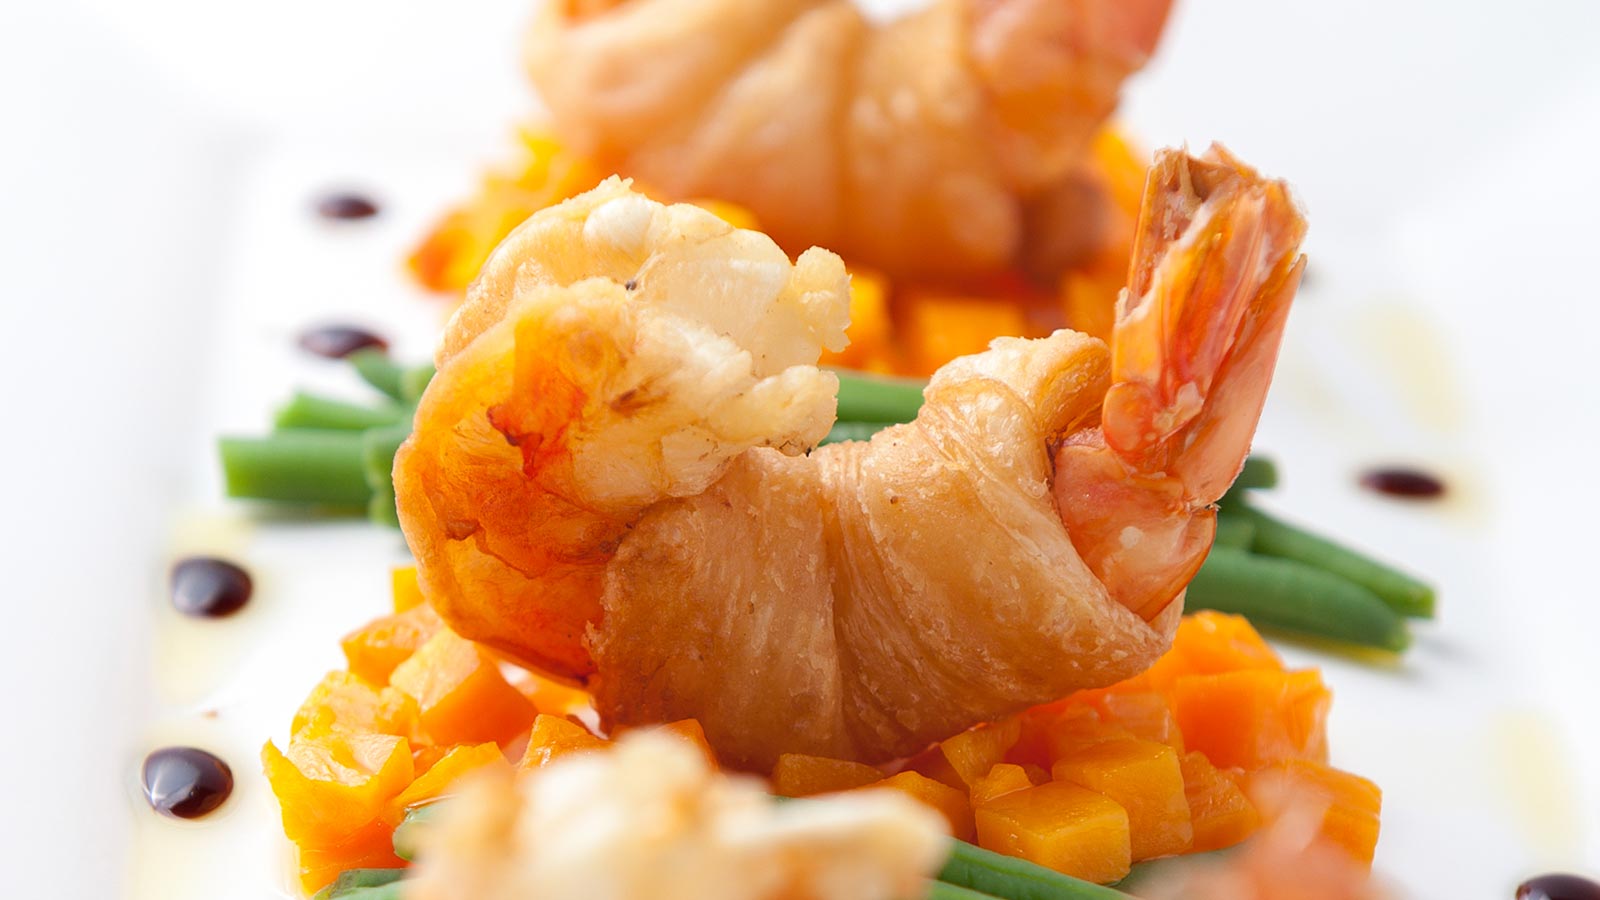 Detail of a shrimp dish made by our chef